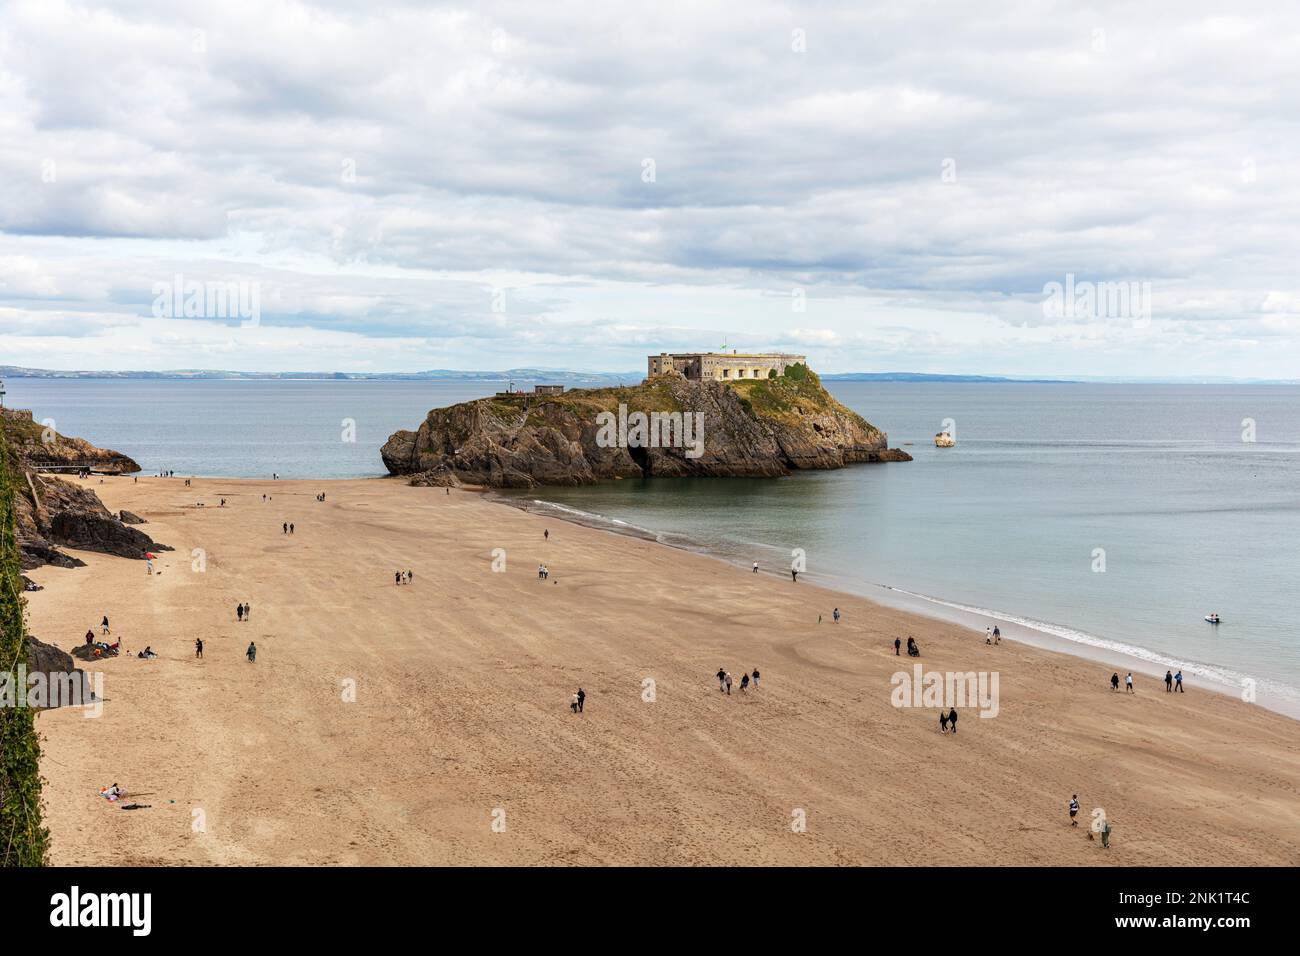 St. Catherine’s Island, Tenby, South Wales, UK. tidal Island located at the foot of Castle Beach, Tenby, Pembrokeshire, Napoleonic Fortress, Stock Photo